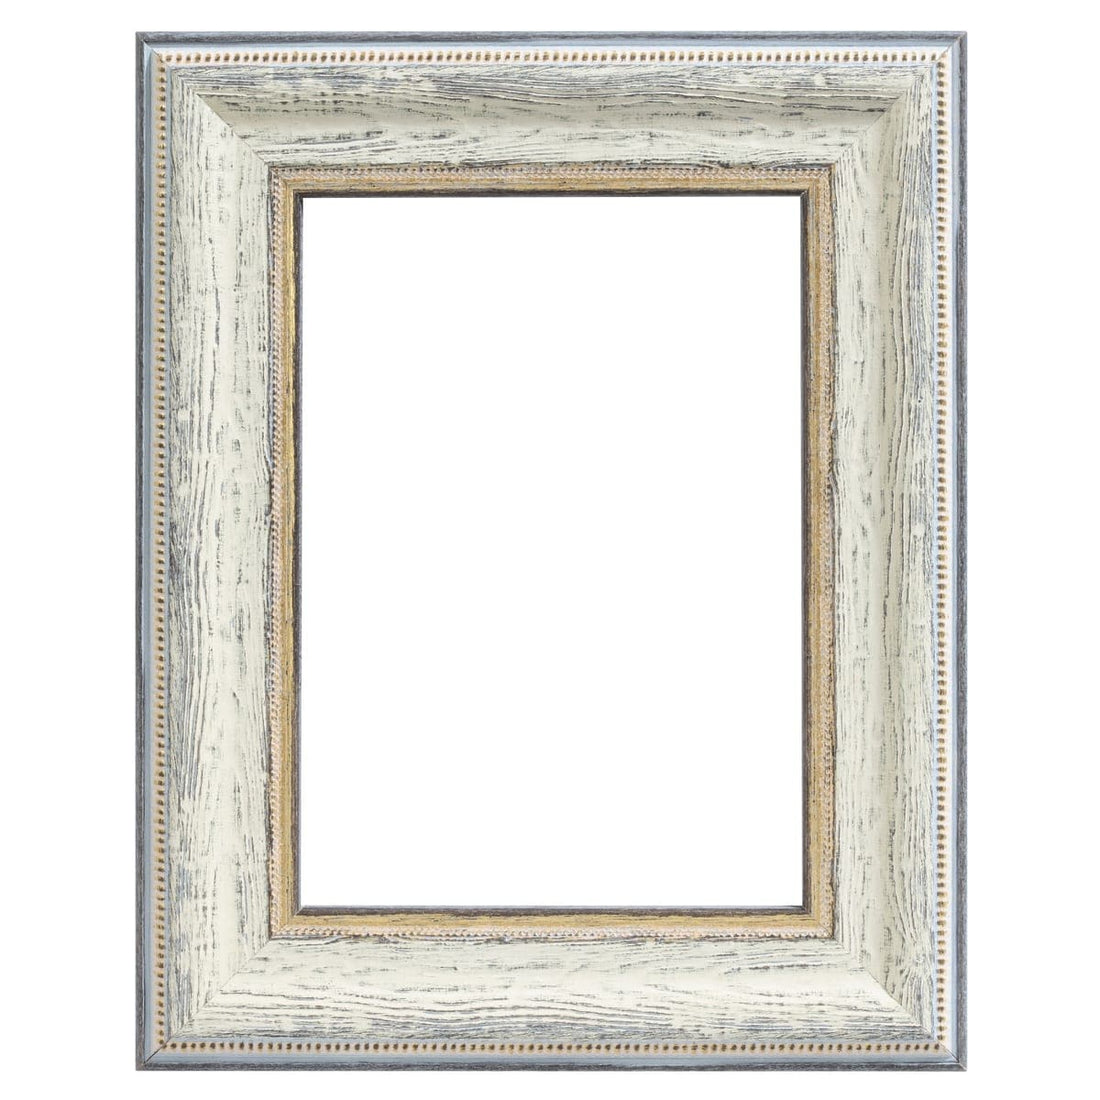 FABRIANO 13X18 BLEACHED WOOD FRAME - best price from Maltashopper.com BR480005015